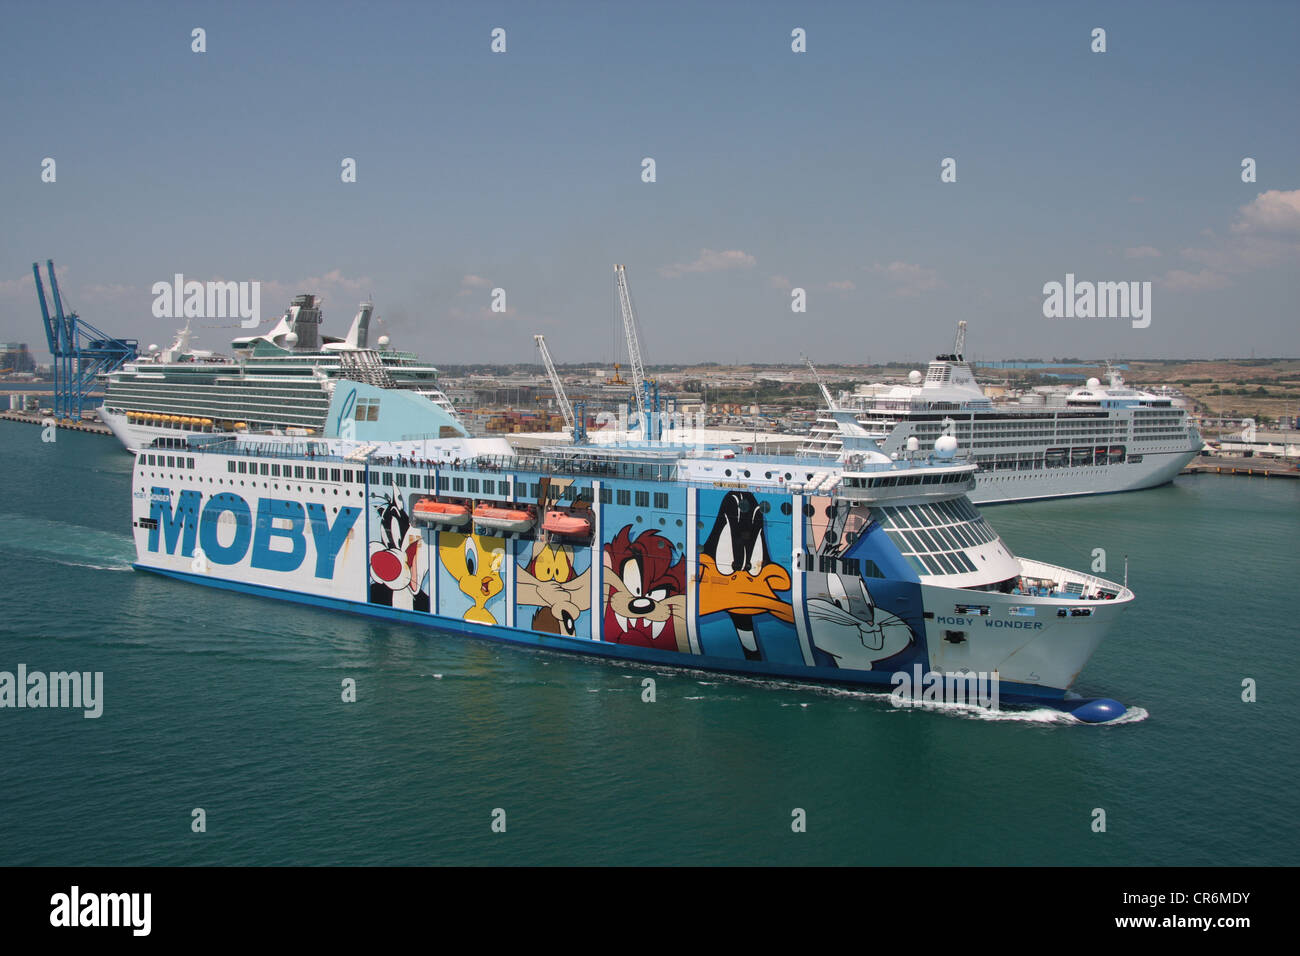 Cartoon characters painted on the side of the Moby Wonder car ferry arriving at Civitavecchia, Italy Stock Photo